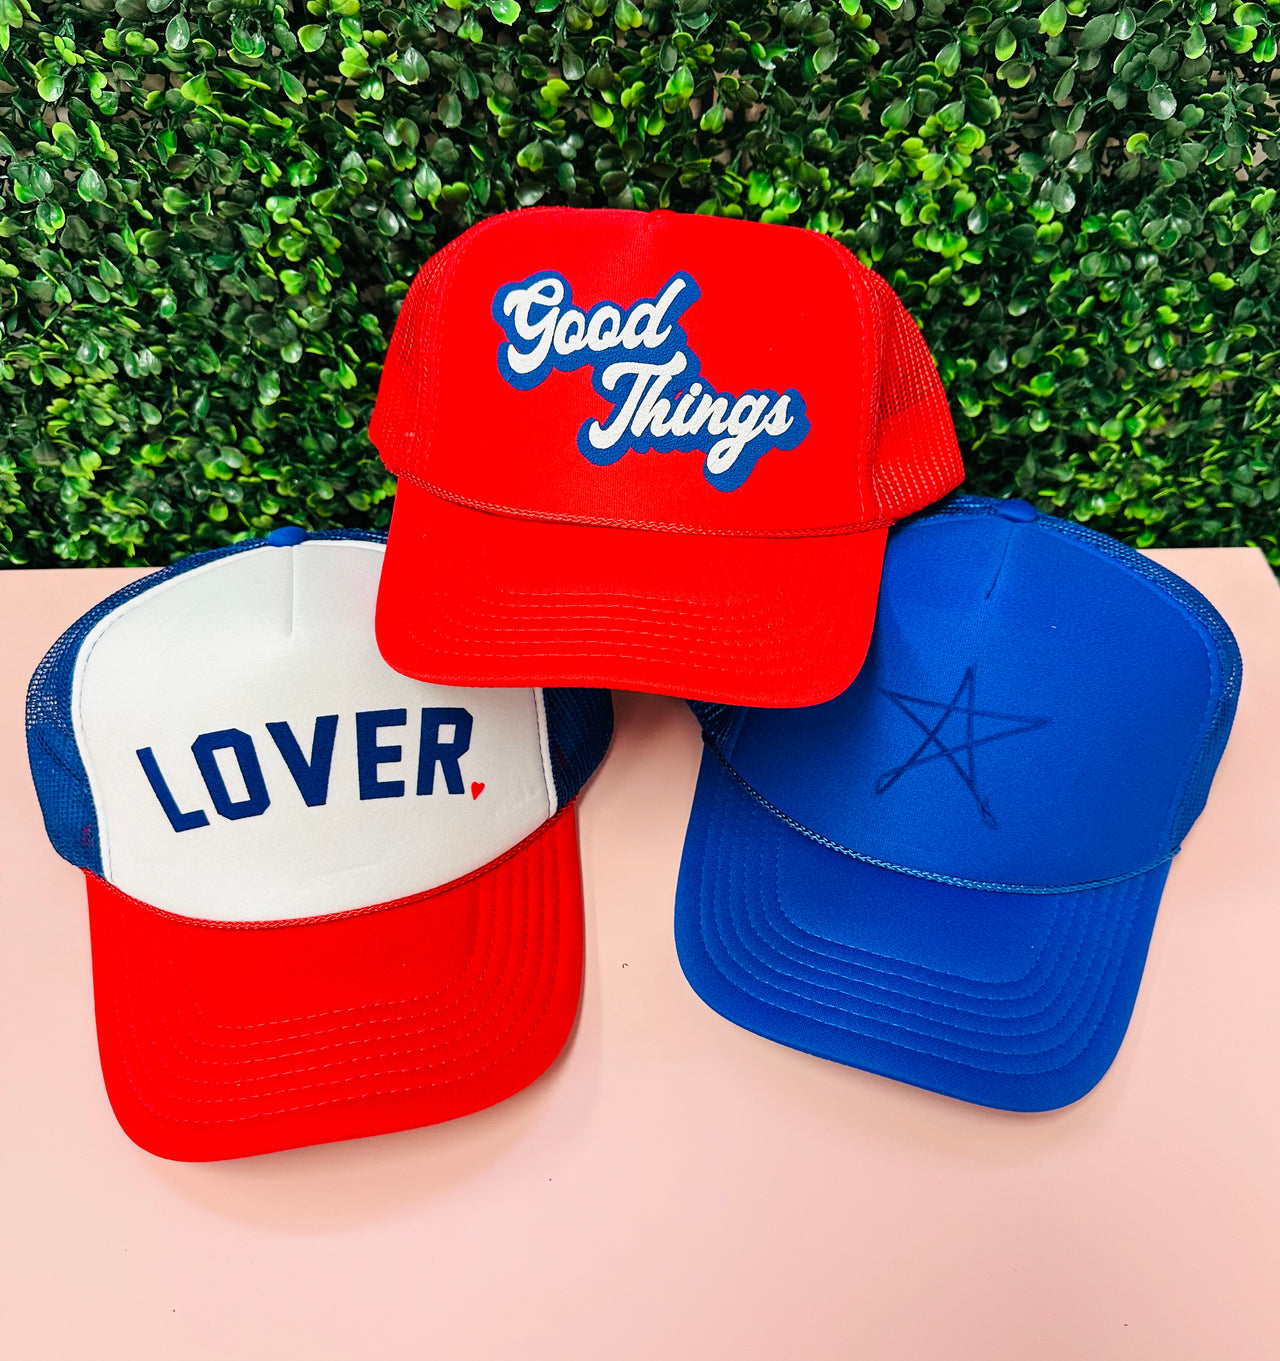 Good Things - Red Trucker